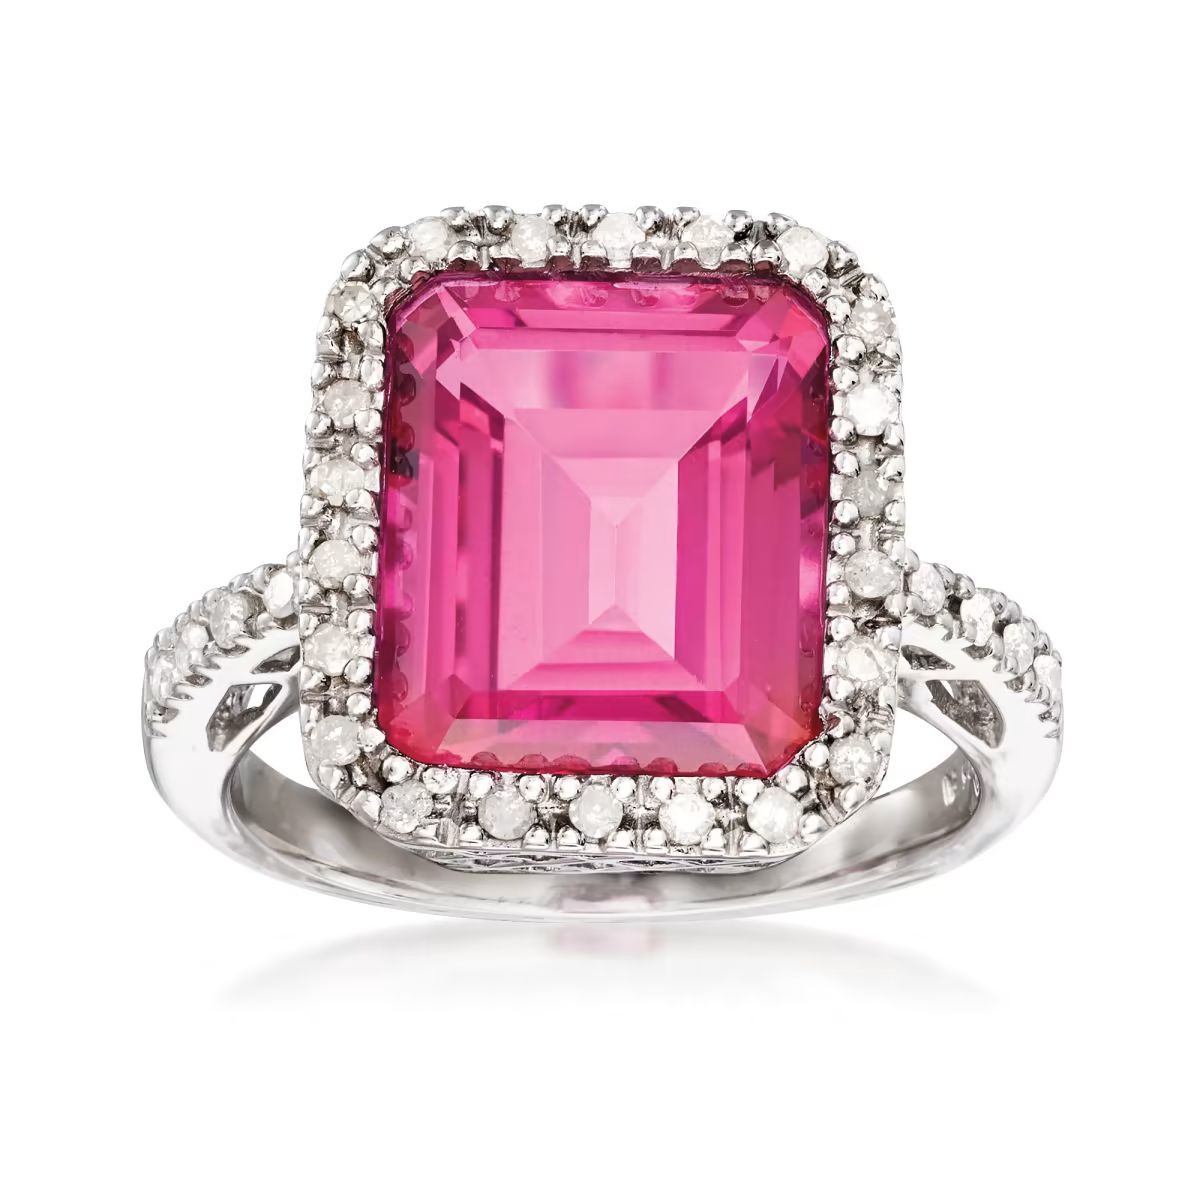 6.50 Carat Pink Topaz and .25 ct. t.w. Diamond Ring in Sterling Silver | Ross-Simons